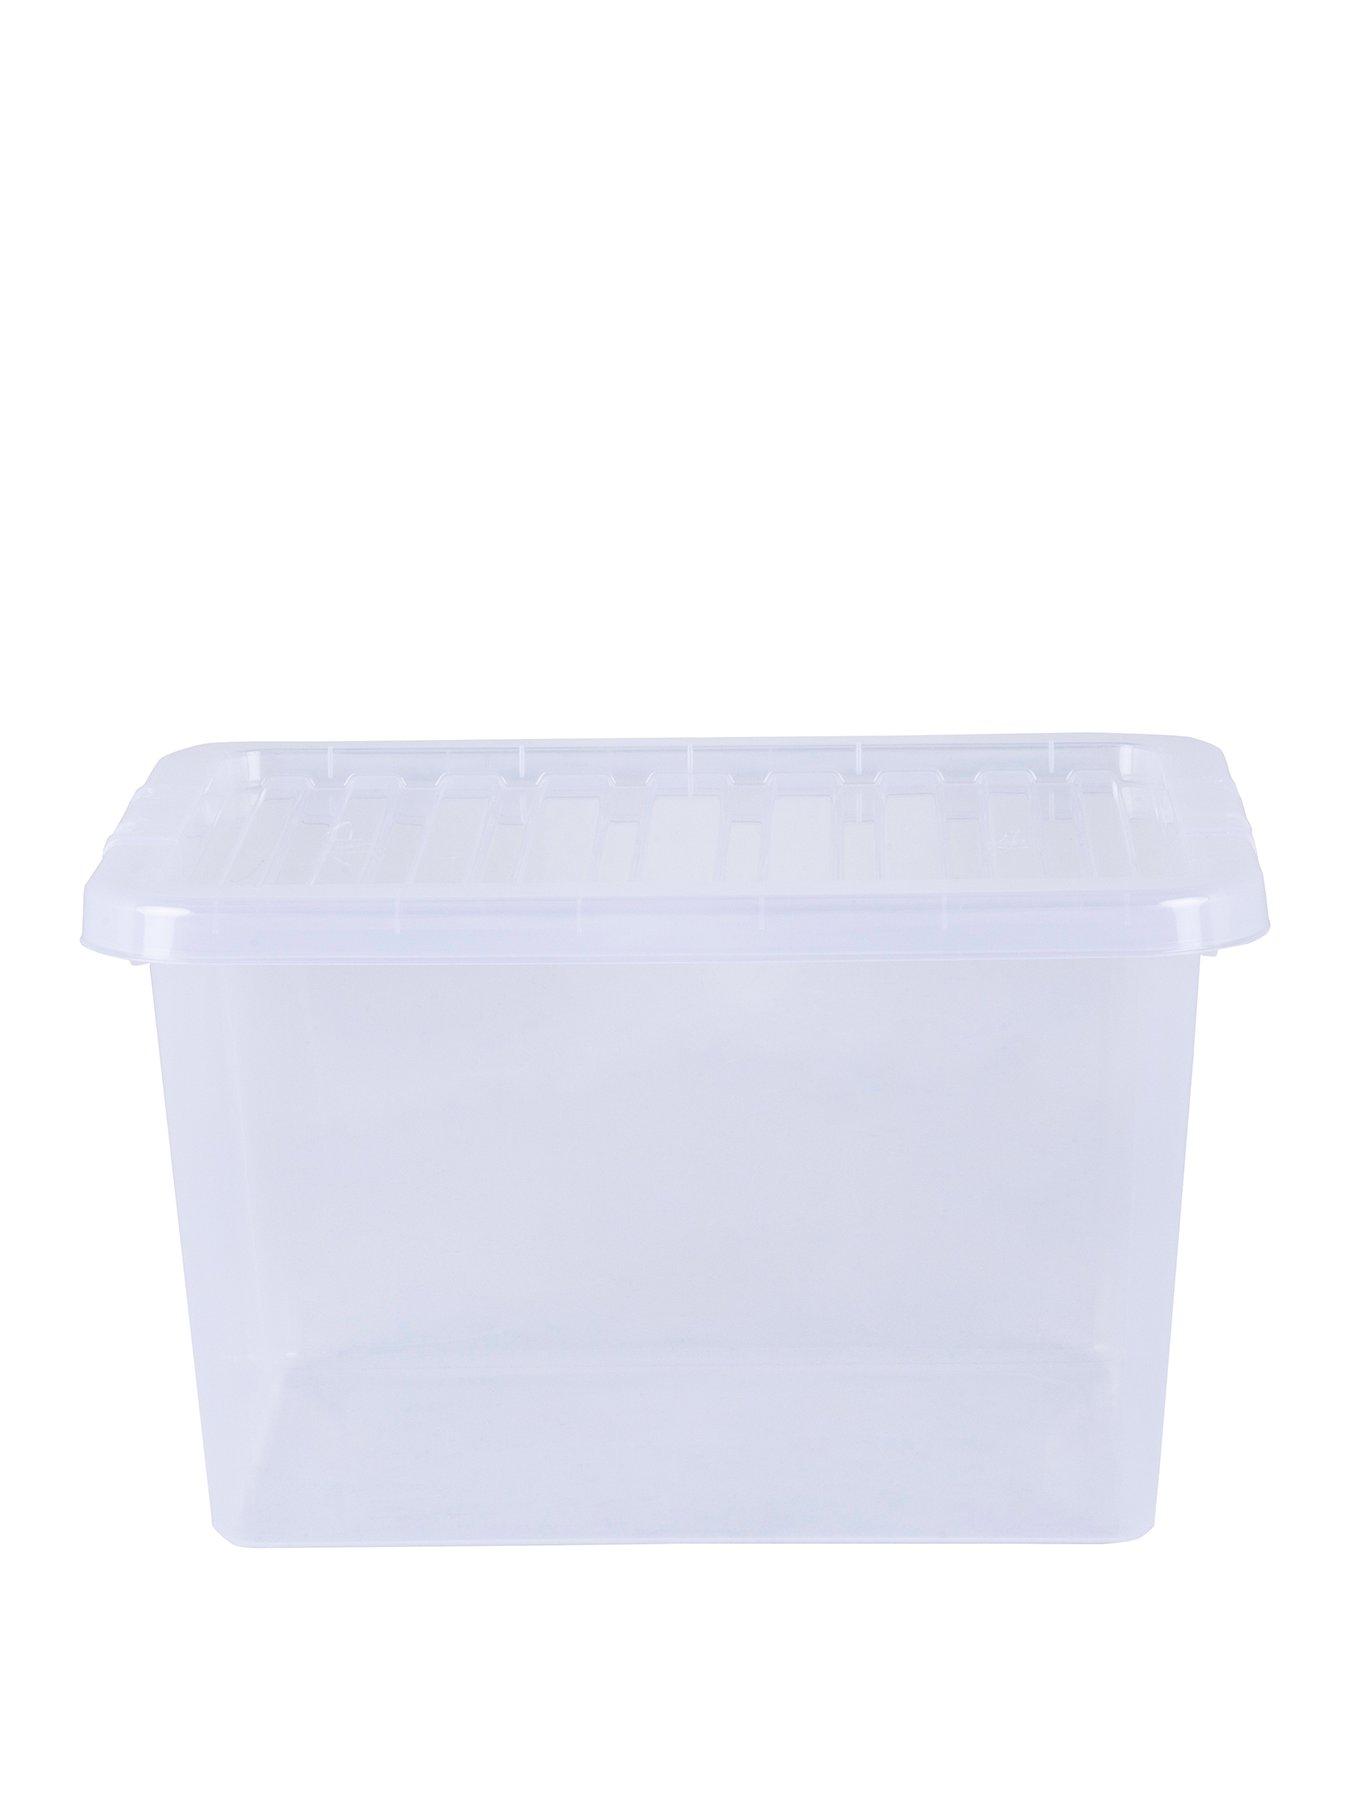 Lid HEAVY DUTY Wham High Quality 25 Litre Clear Plastic Foo Storage Container 